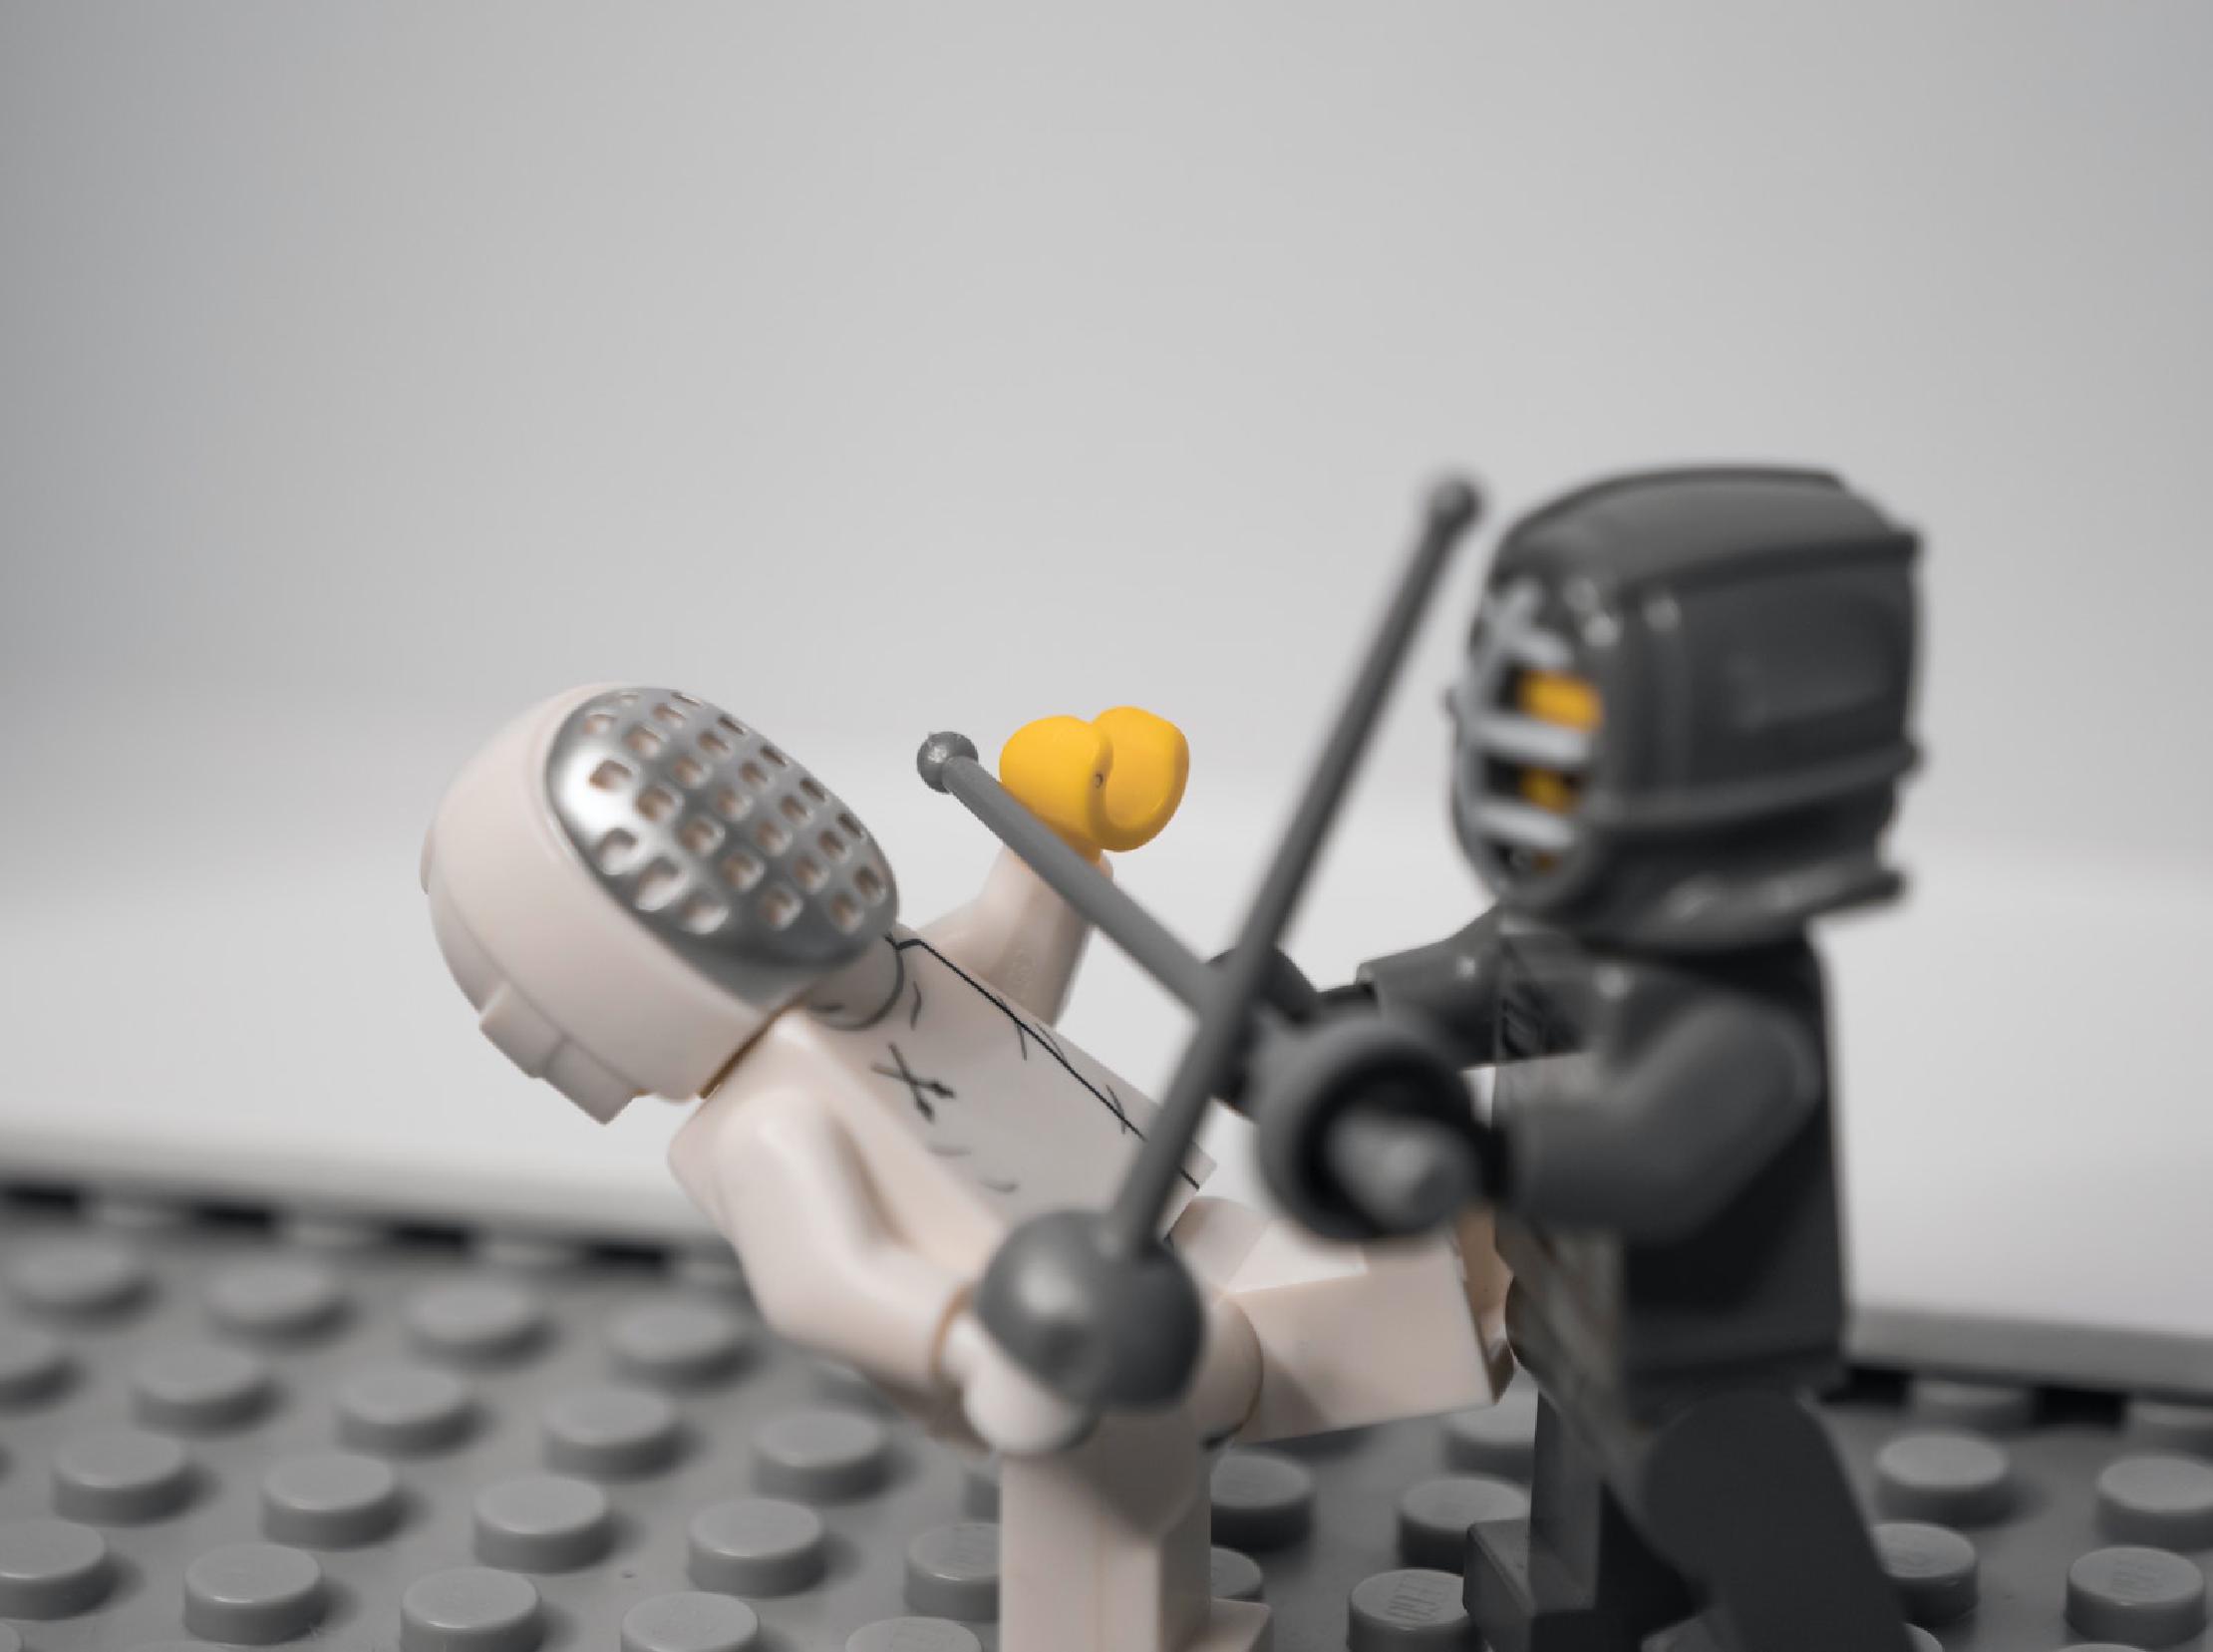 Thumbnail two lego men dueling with swords